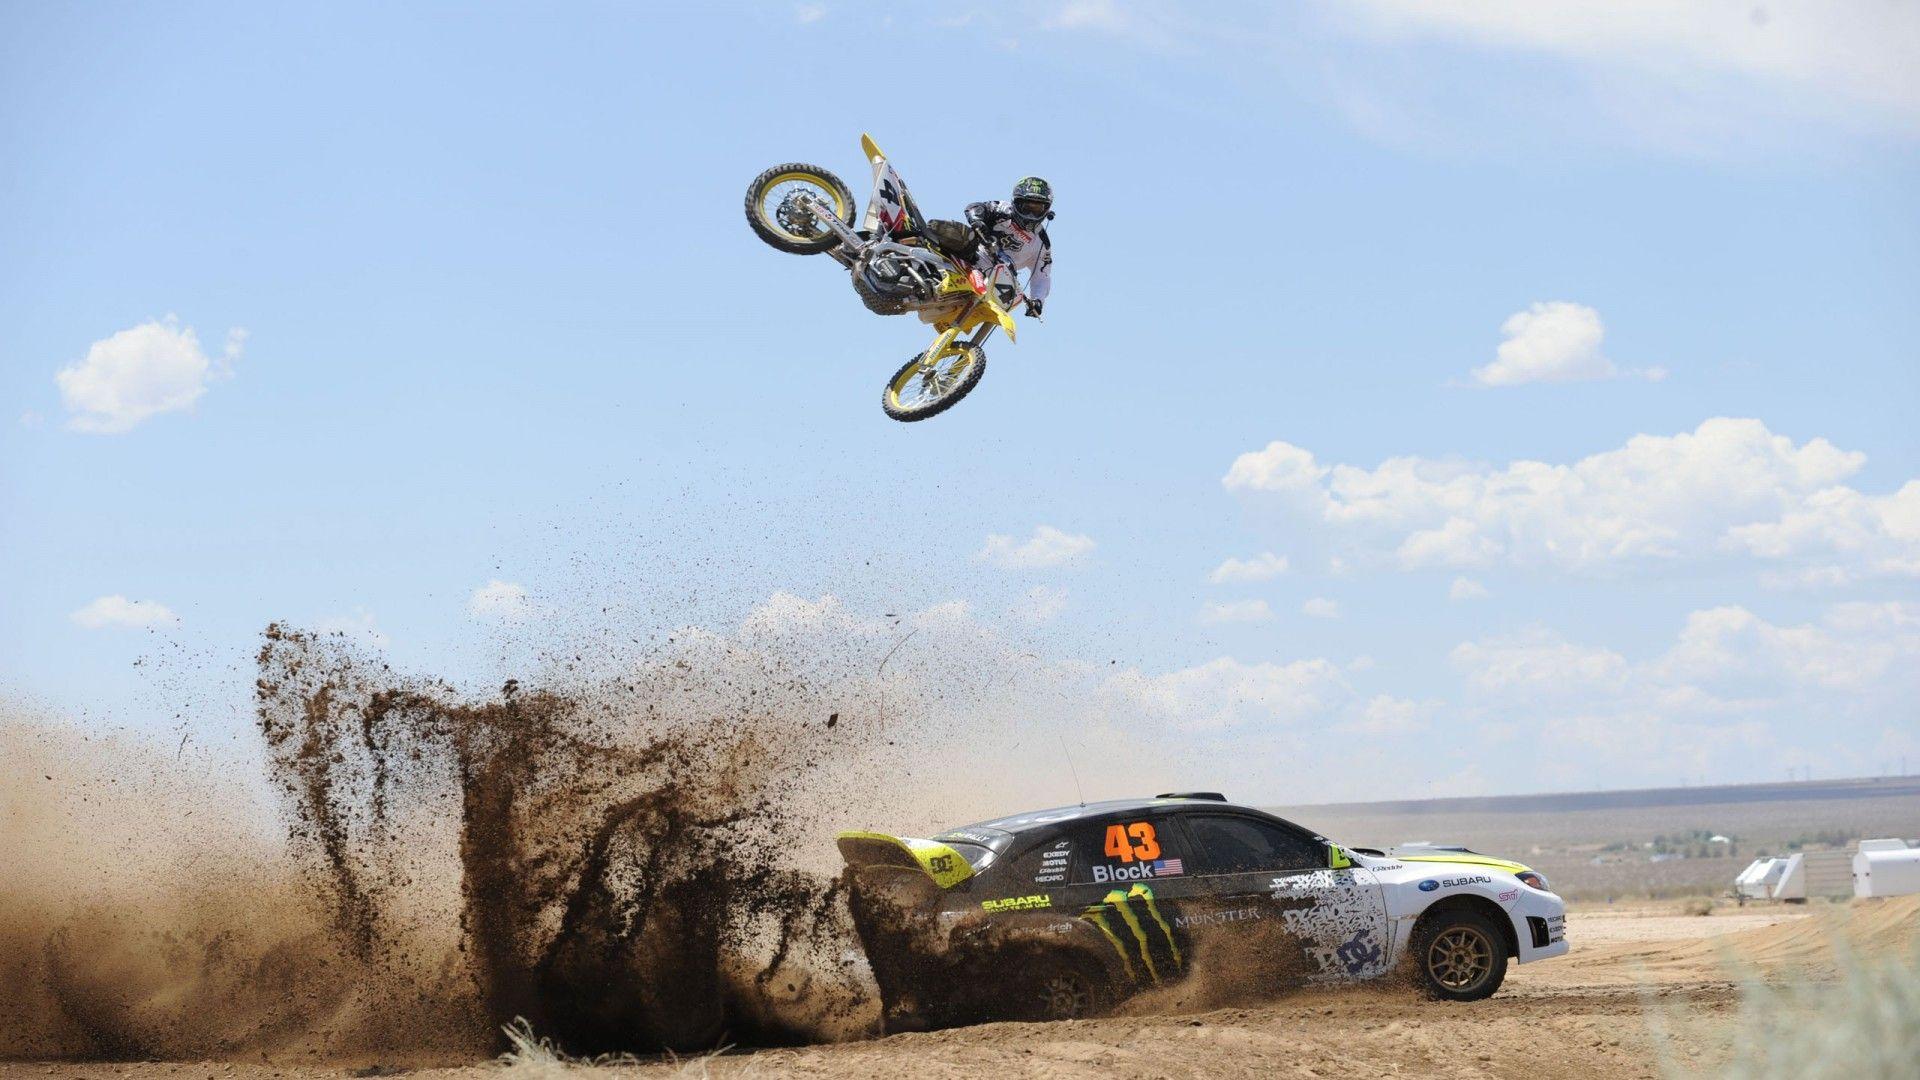 High Quality Motocross HD Wallpaper. Full HD Picture